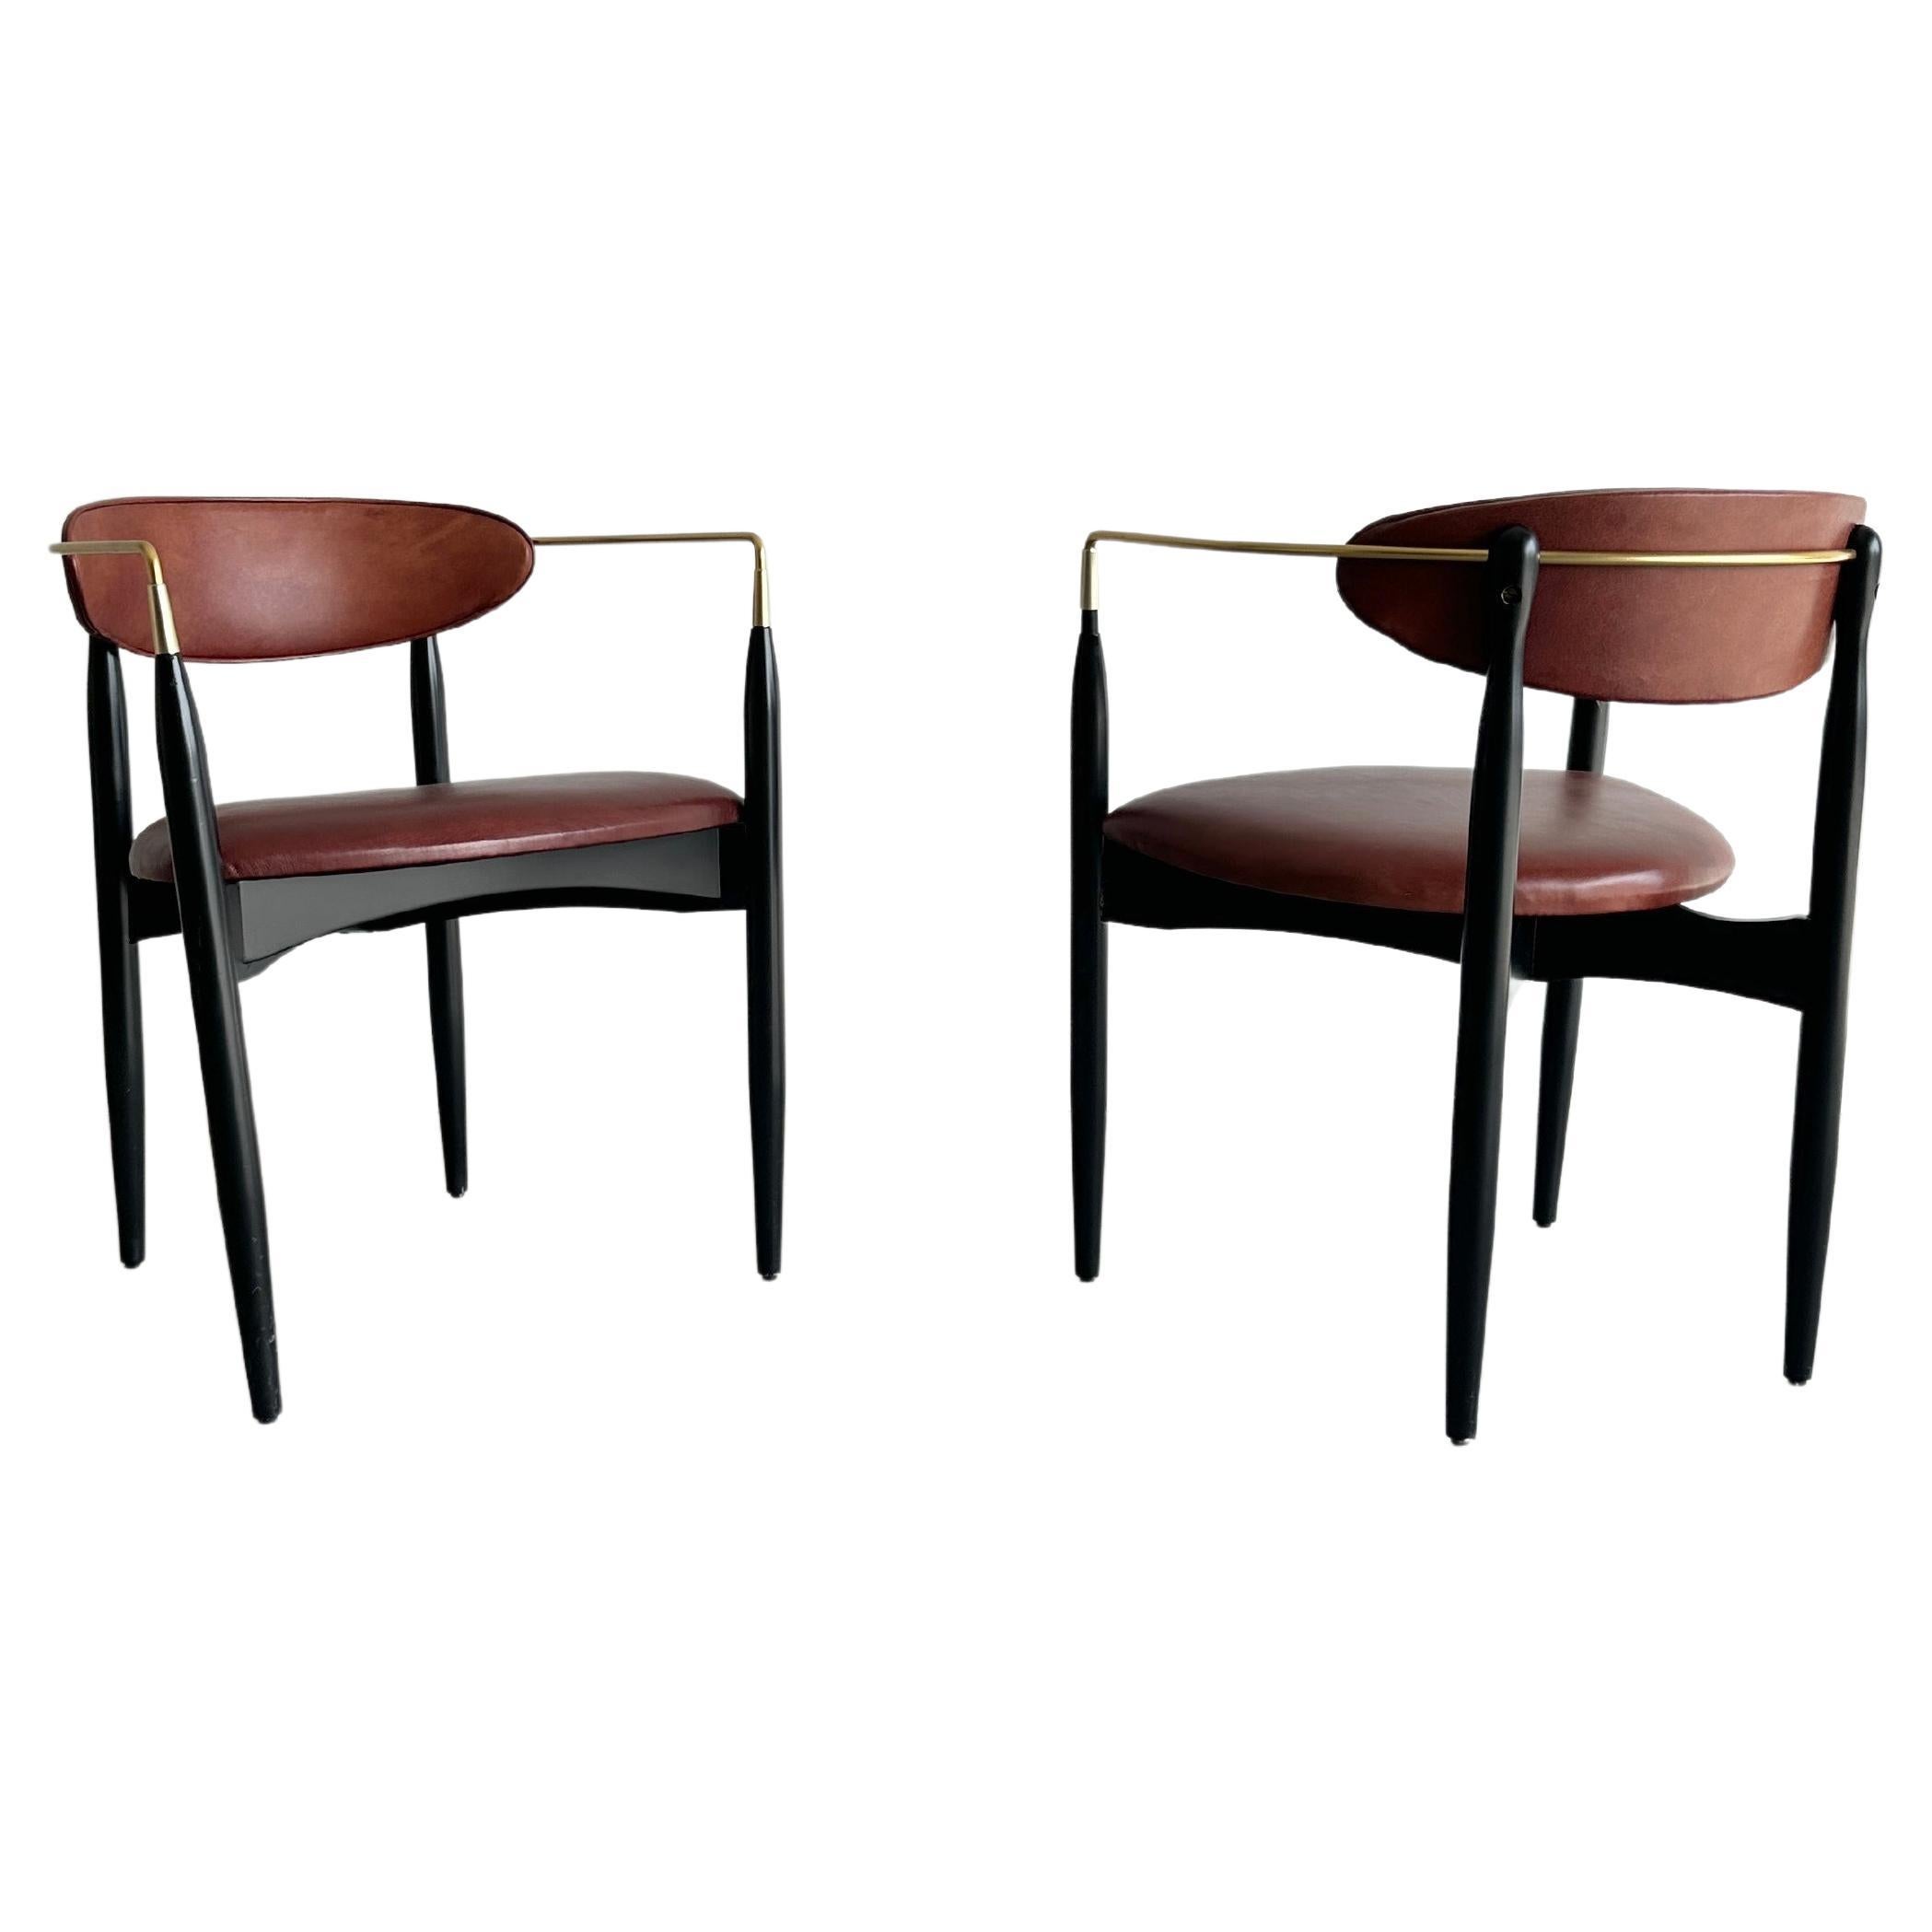 Pair of deep red leather 'Viscount' chairs by Dan Johnson for Selig